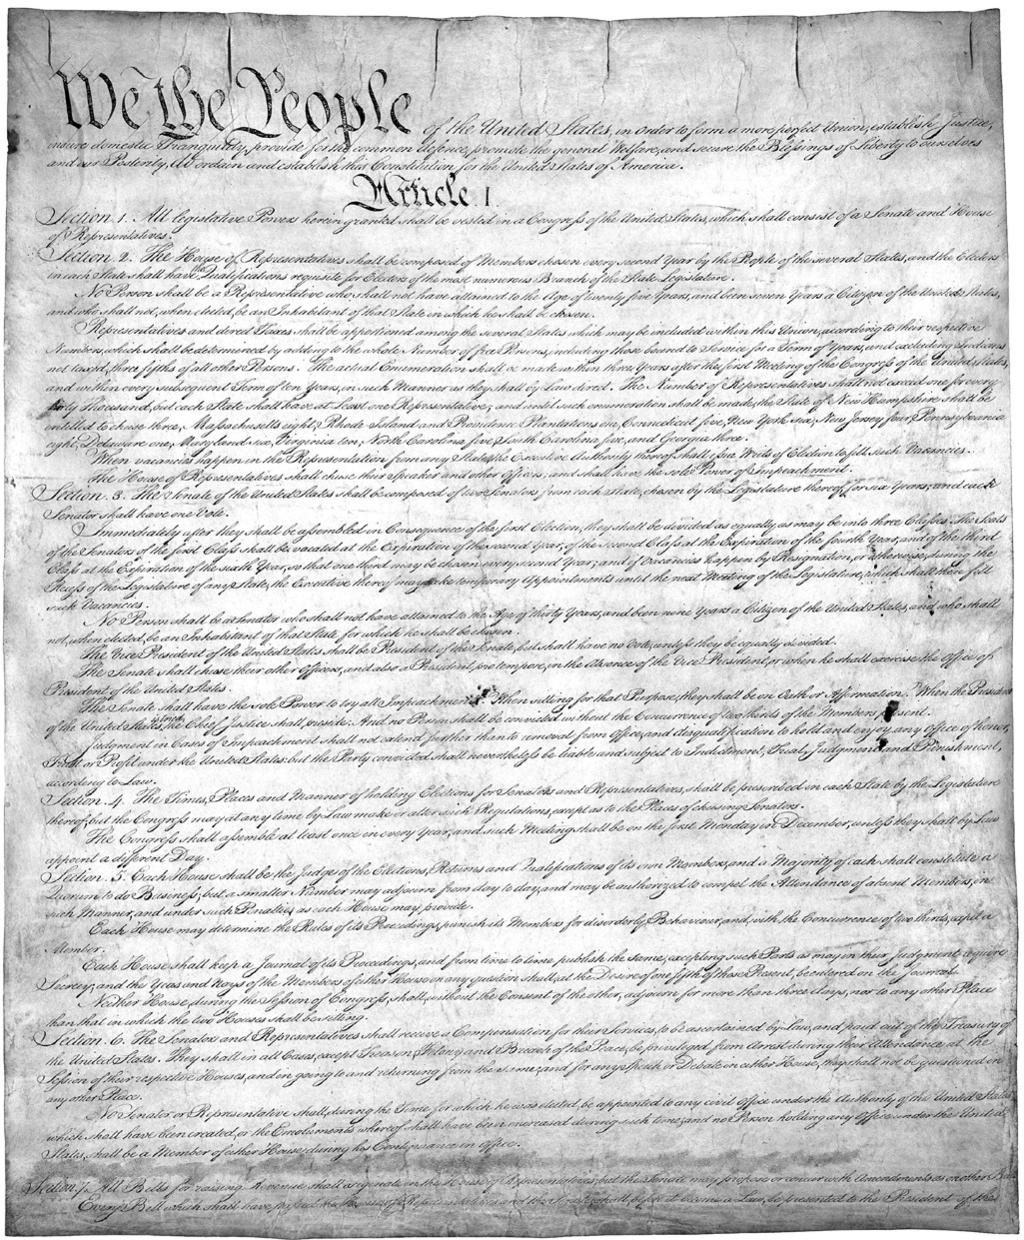 The Constitution of the United States The following text is a transcription of the Constitution in its original form with original spelling (U.S. National Archives and Records Administration).